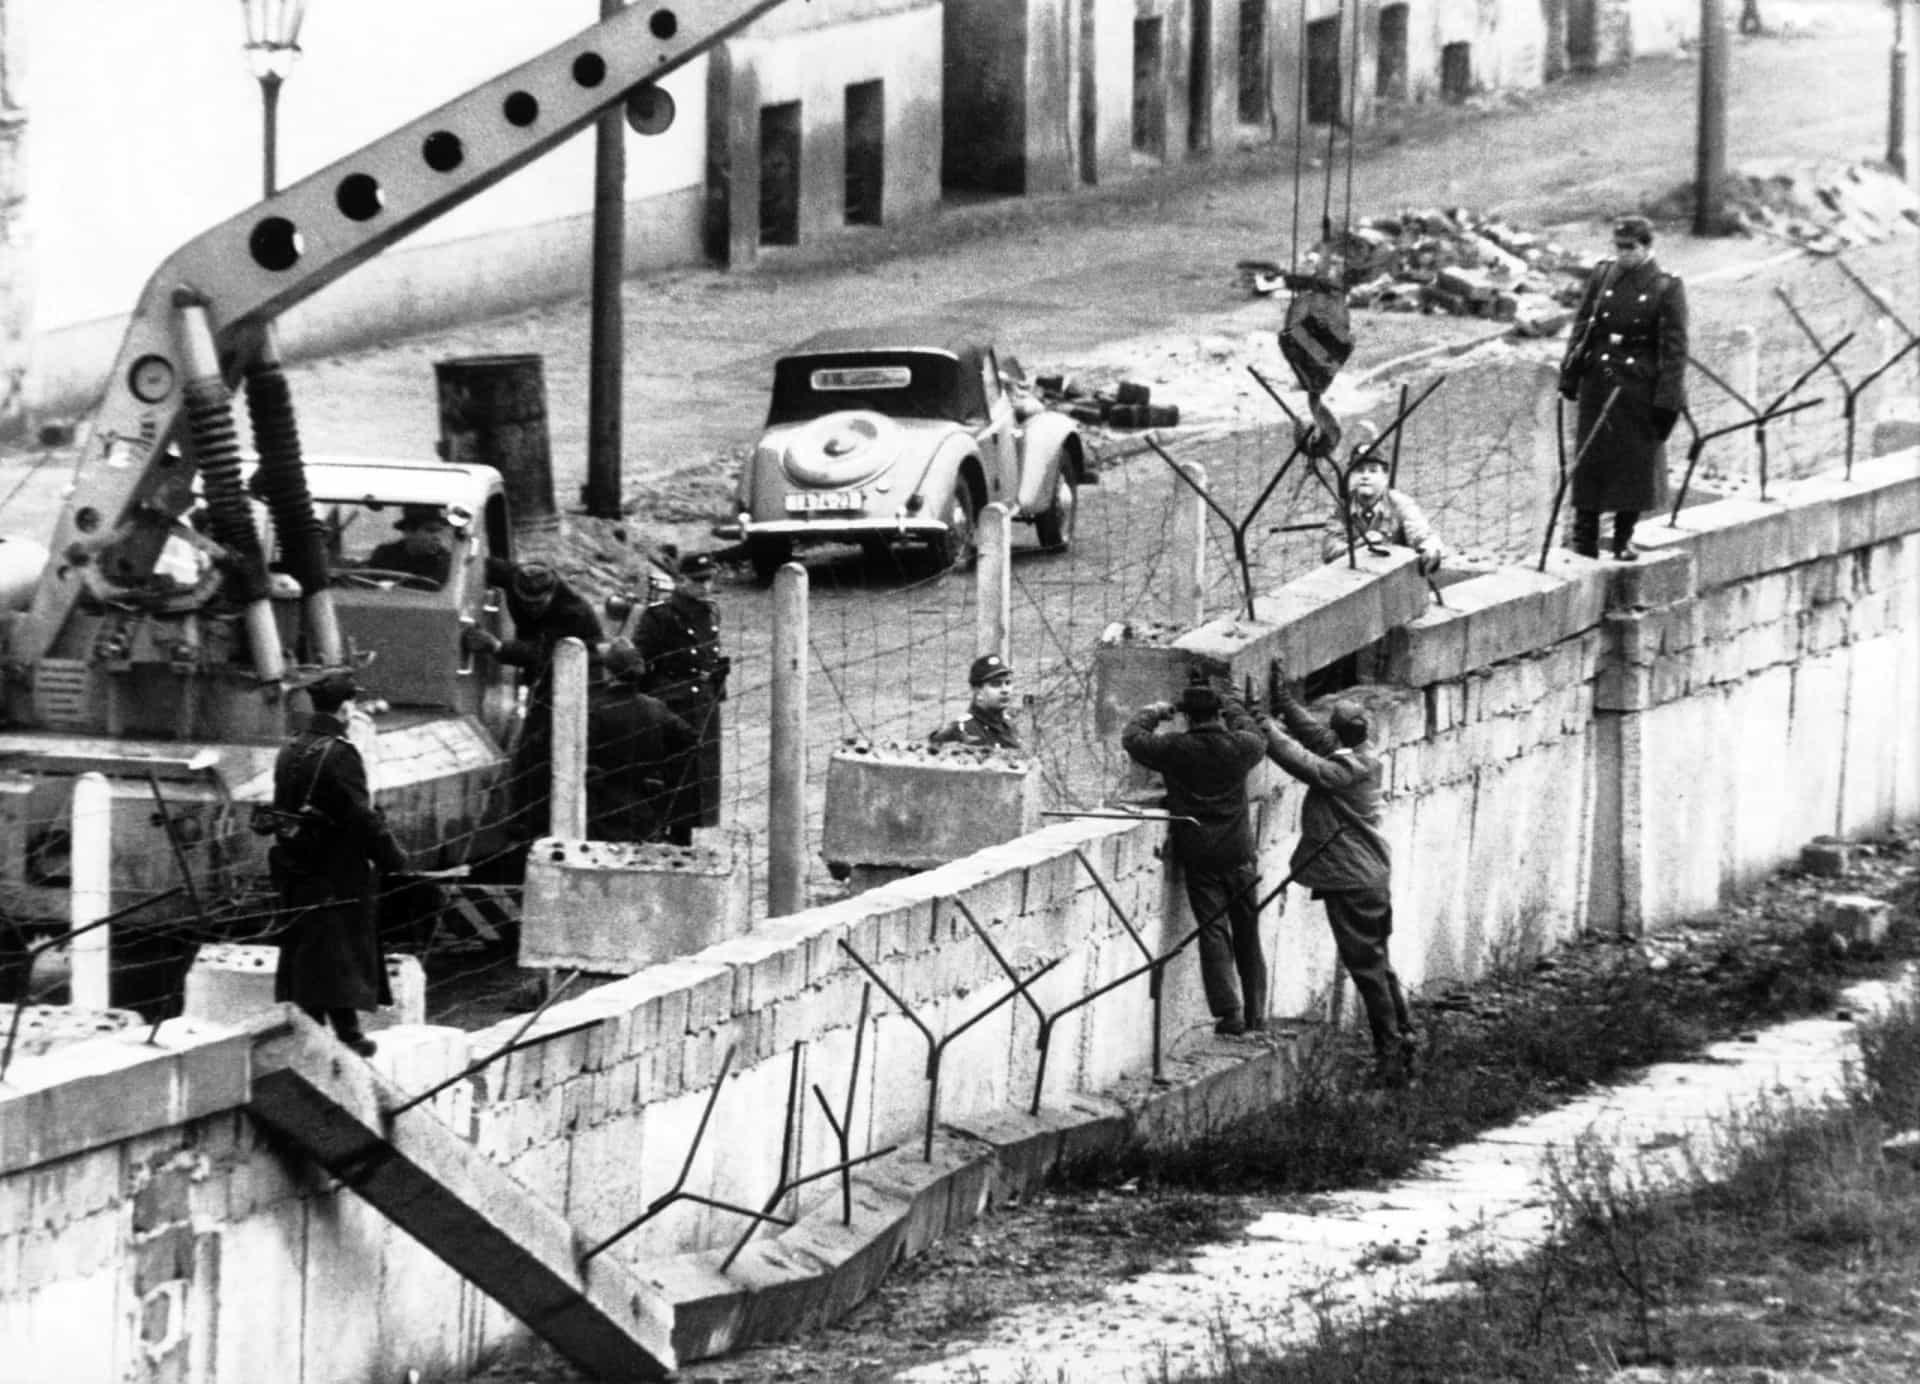 <p>Construction of the wall took place across the city in coordinated sequence, built by East German laborers supervised by armed police and units of the East German security forces.</p><p><a href="https://www.msn.com/en-us/community/channel/vid-7xx8mnucu55yw63we9va2gwr7uihbxwc68fxqp25x6tg4ftibpra?cvid=94631541bc0f4f89bfd59158d696ad7e">Follow us and access great exclusive content everyday</a></p>